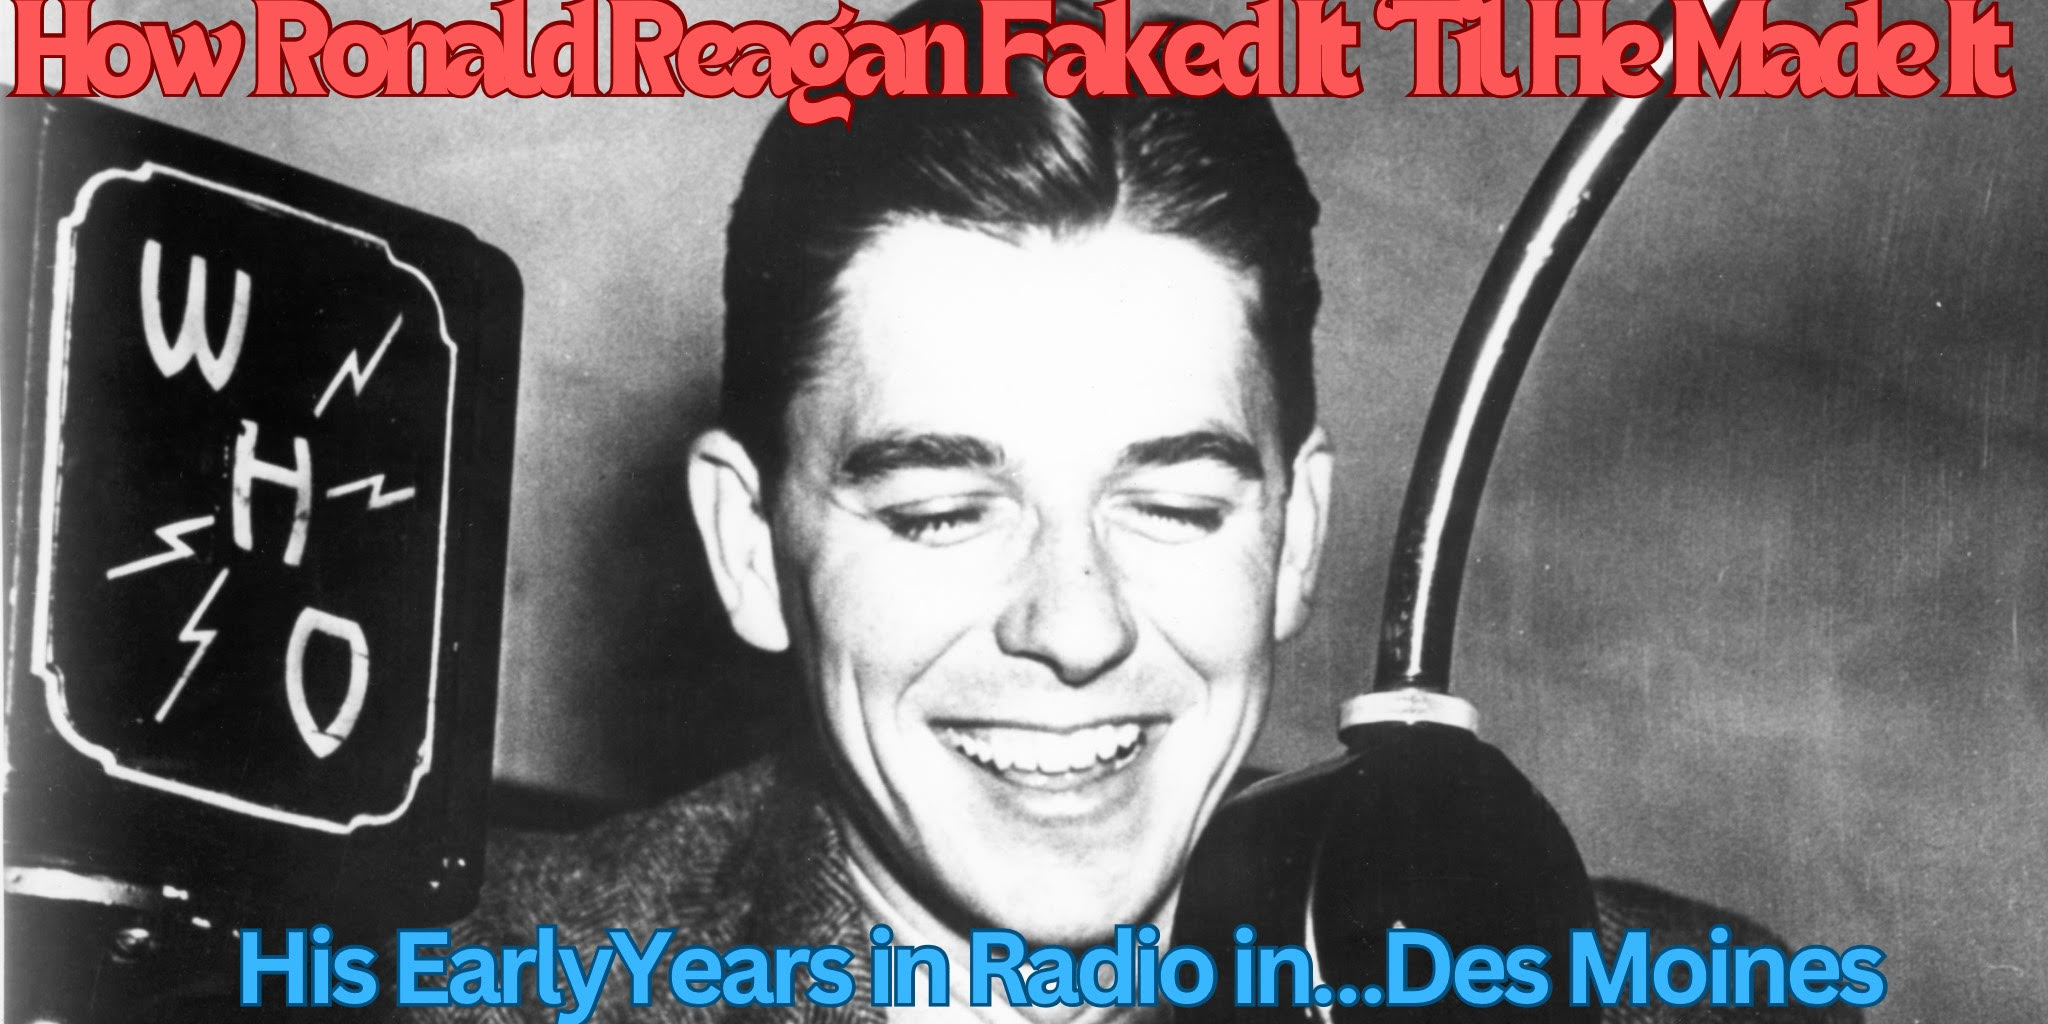 How Ronald Reagan Faked It 'Til He Made It: His Early Years in Radio in...Des Moines?